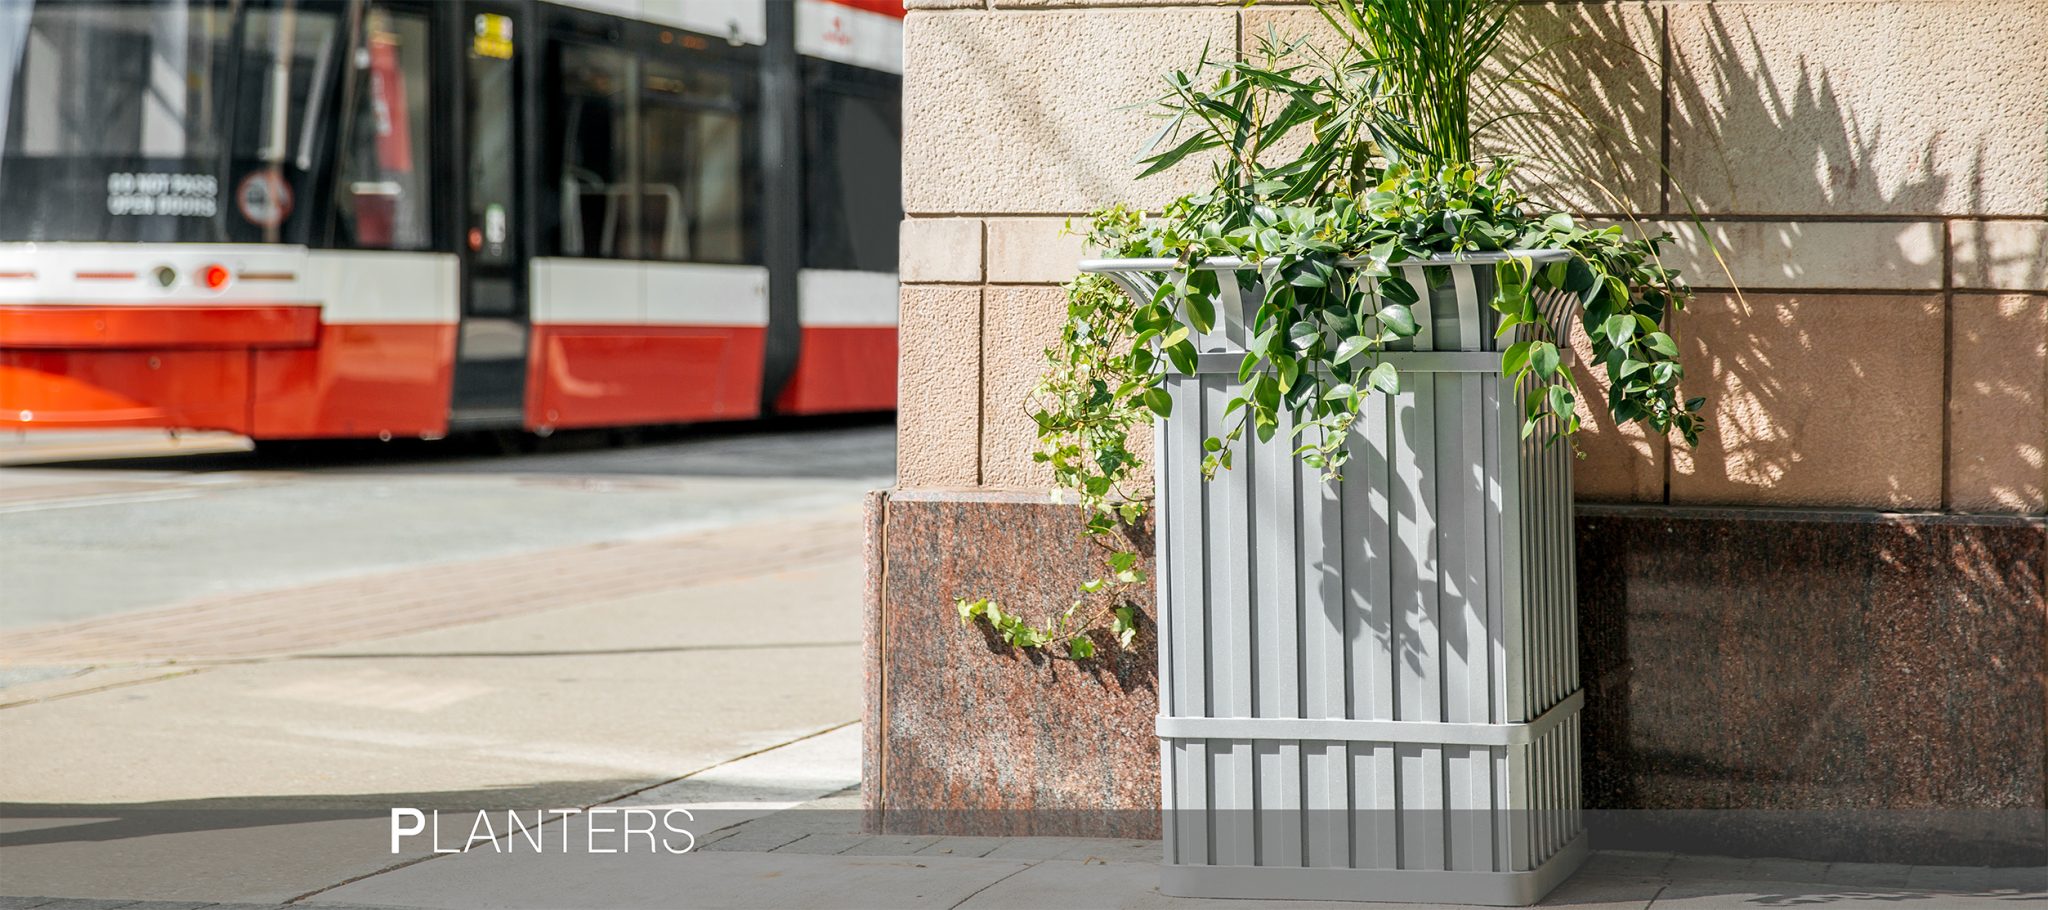 Outdoor commercial metal planter helps increase green coverage in urban areas and add a breath of fresh air to business settings